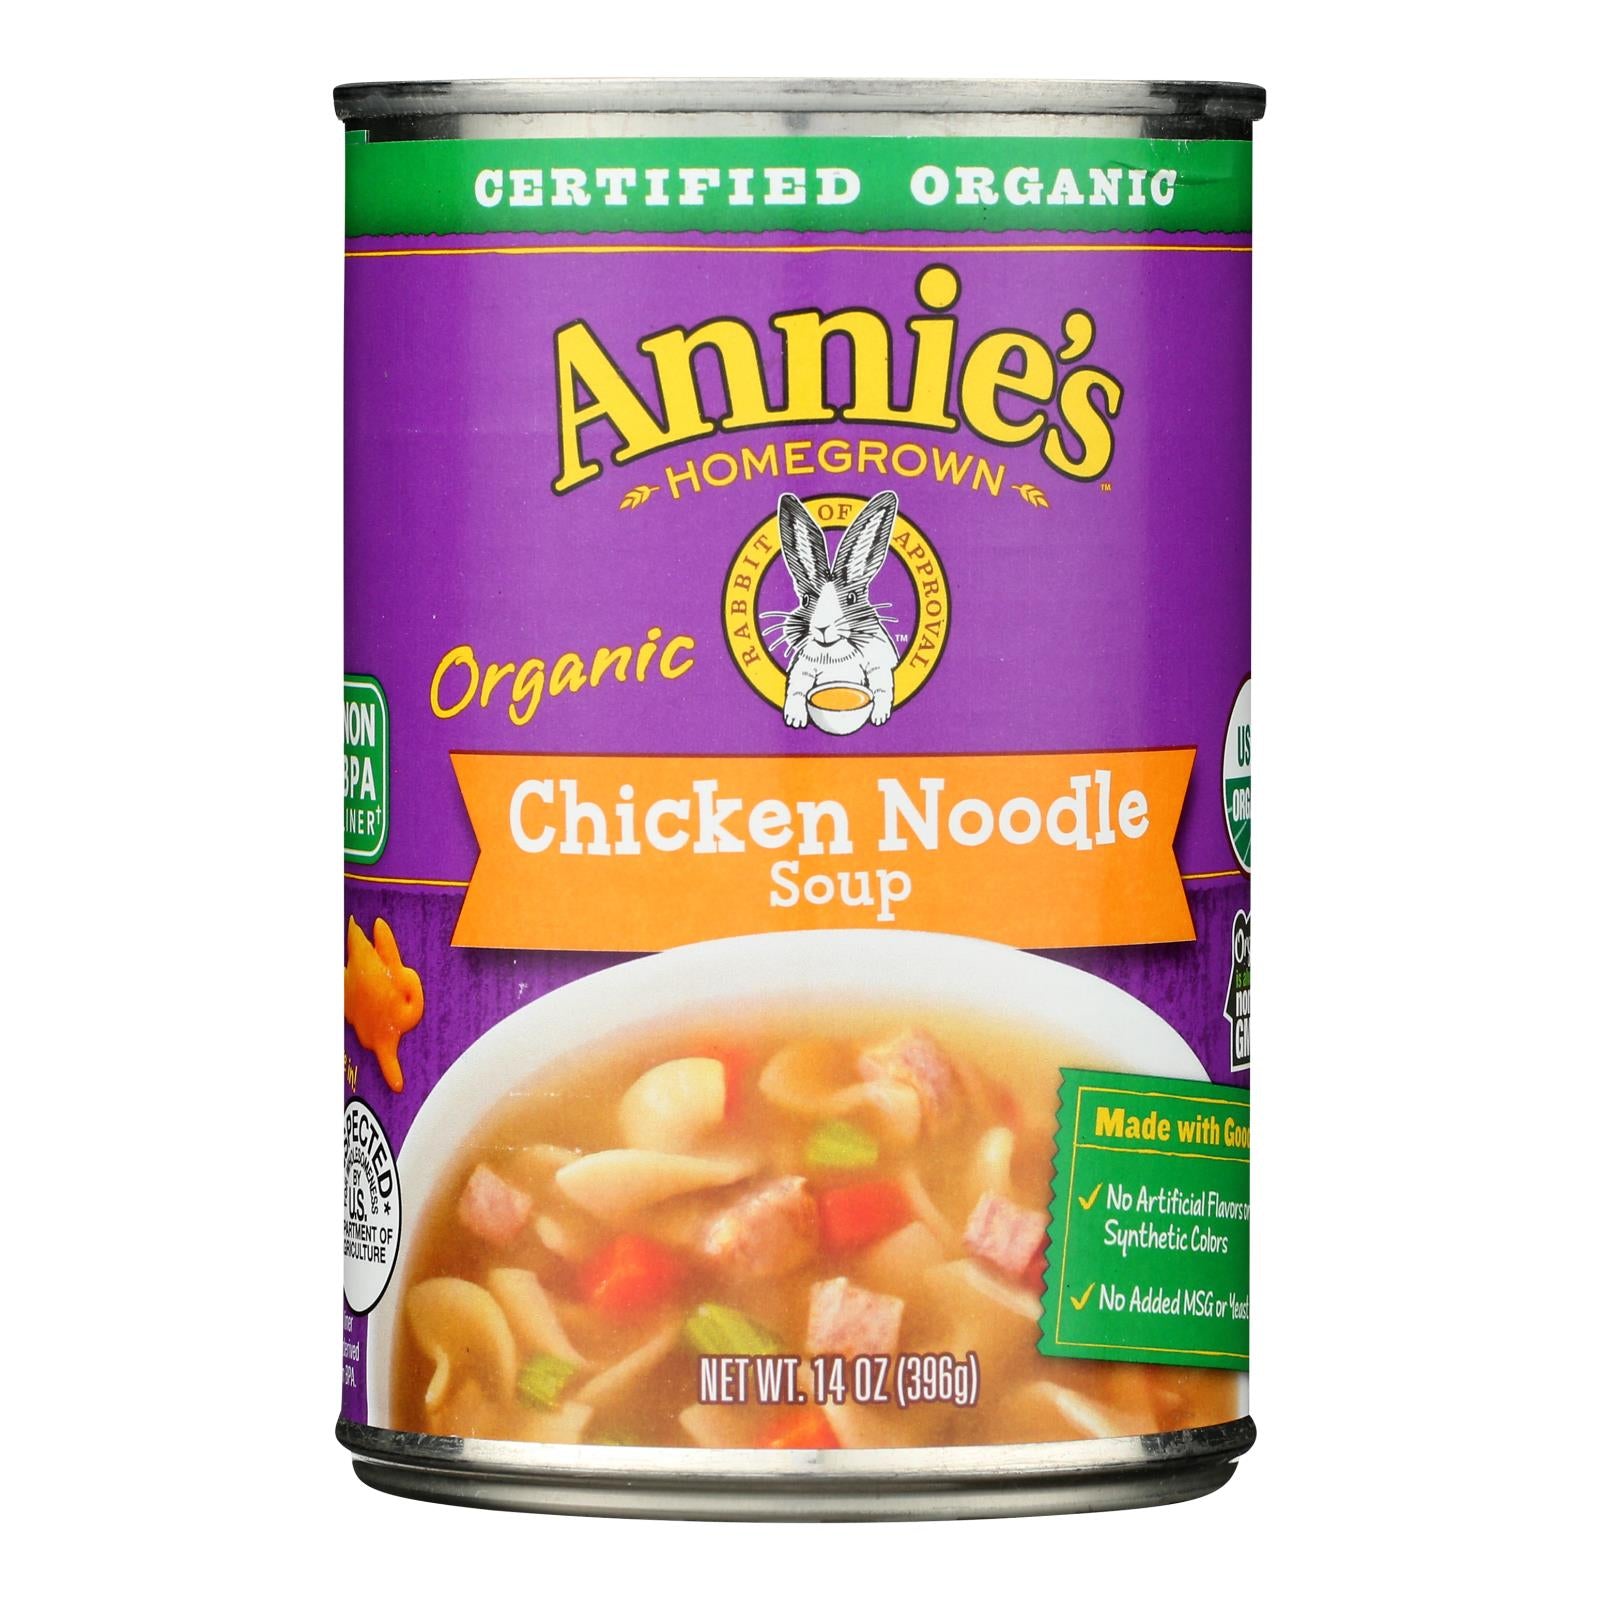 Annie'S Homegrown, Annie's Homegrown - Organic Soup - Chicken Noodle - Case of 8 - 14 oz. (Pack of 8)